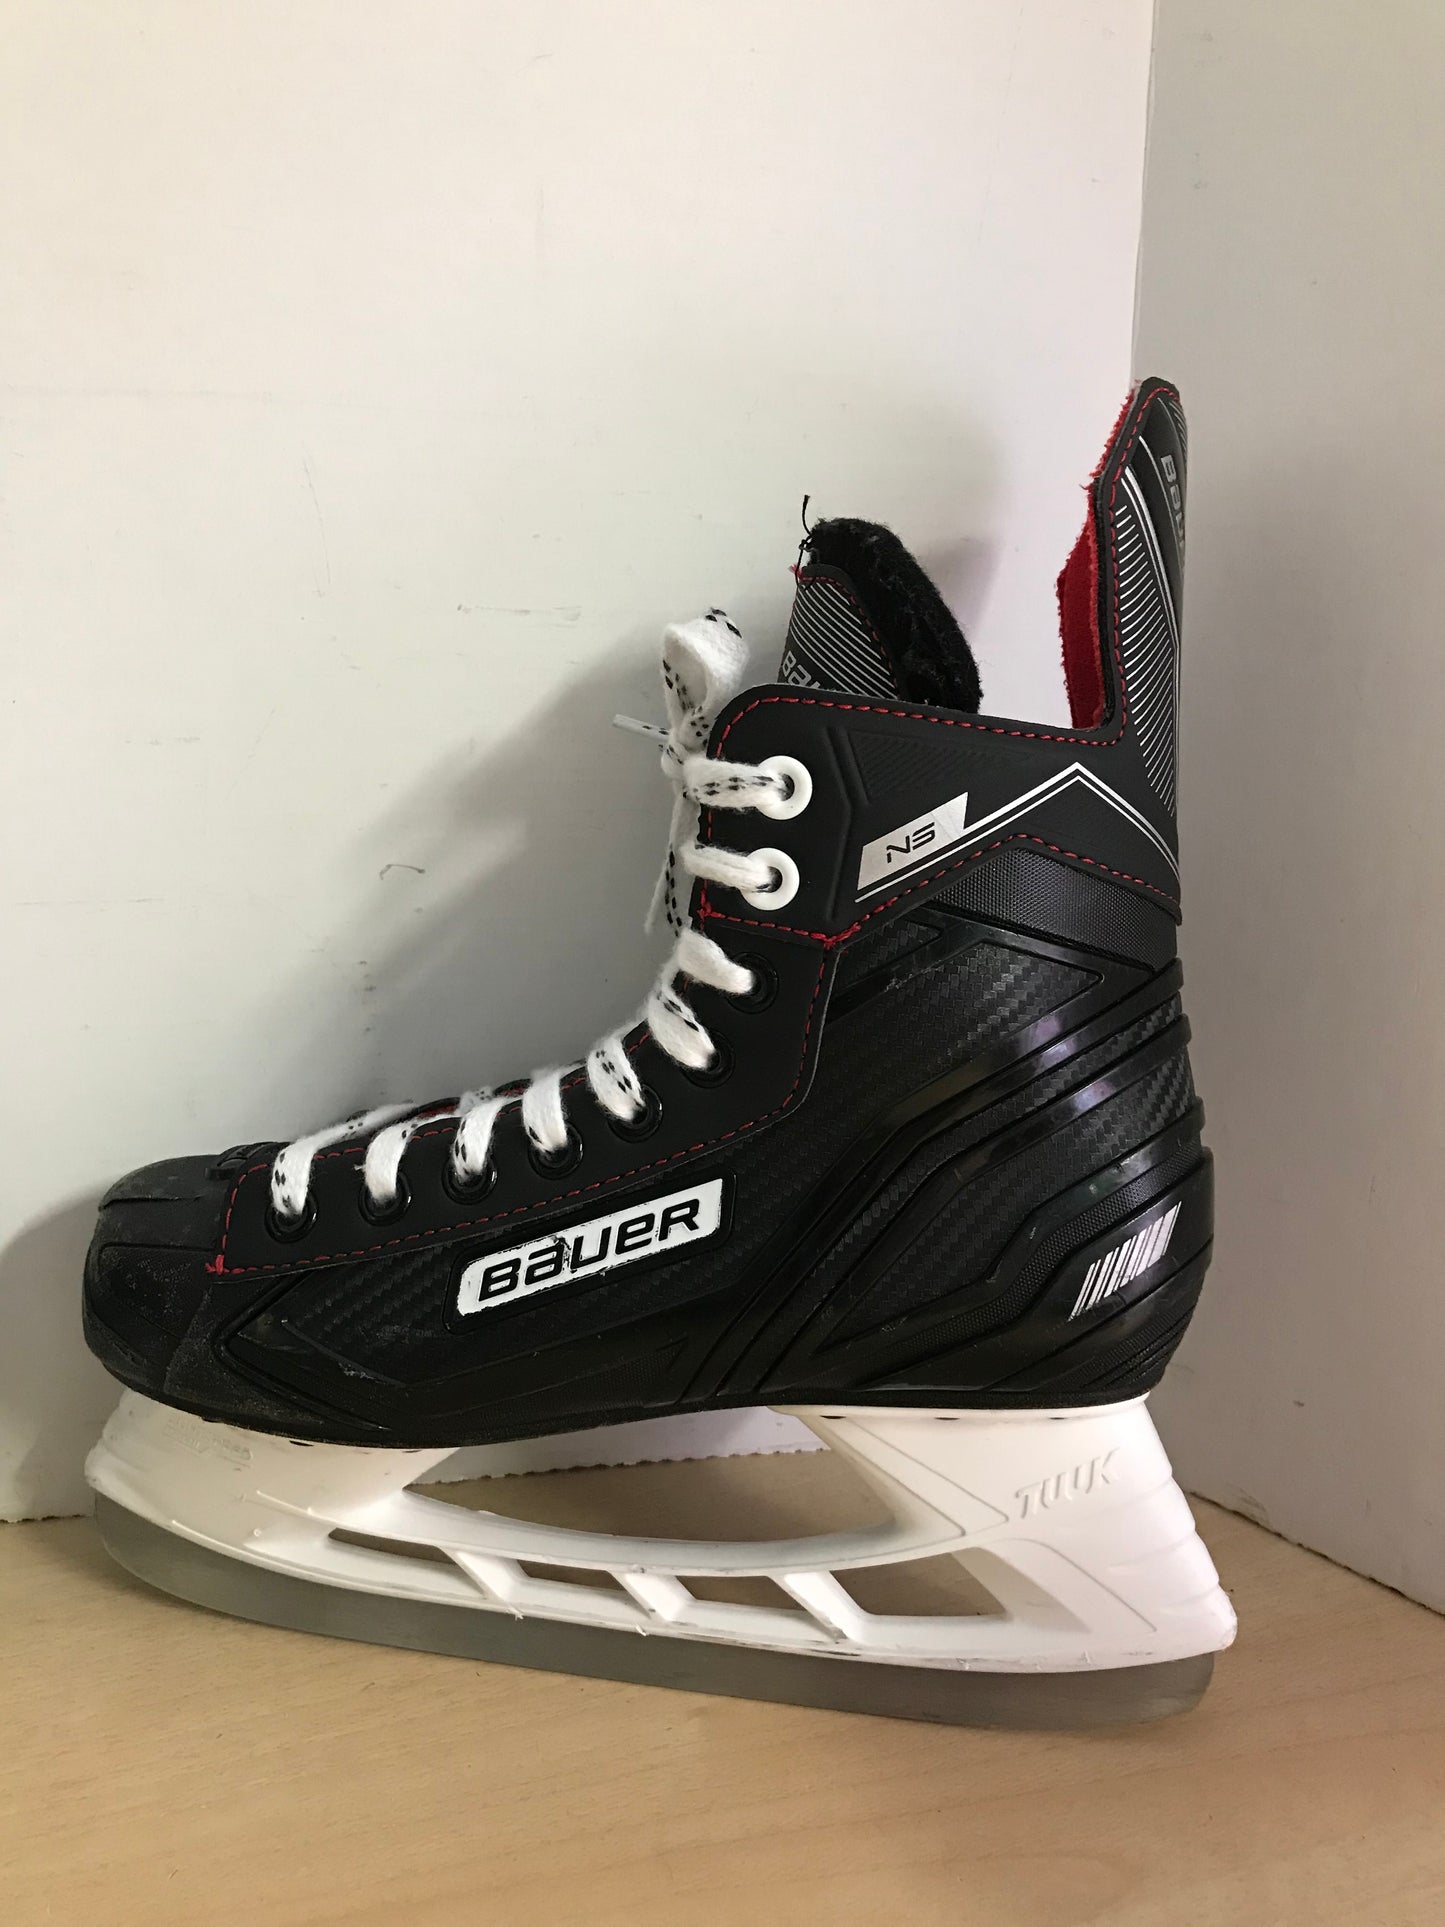 Hockey Skates Child Size 6 Youth Shoe Size Bauer NS Excellent